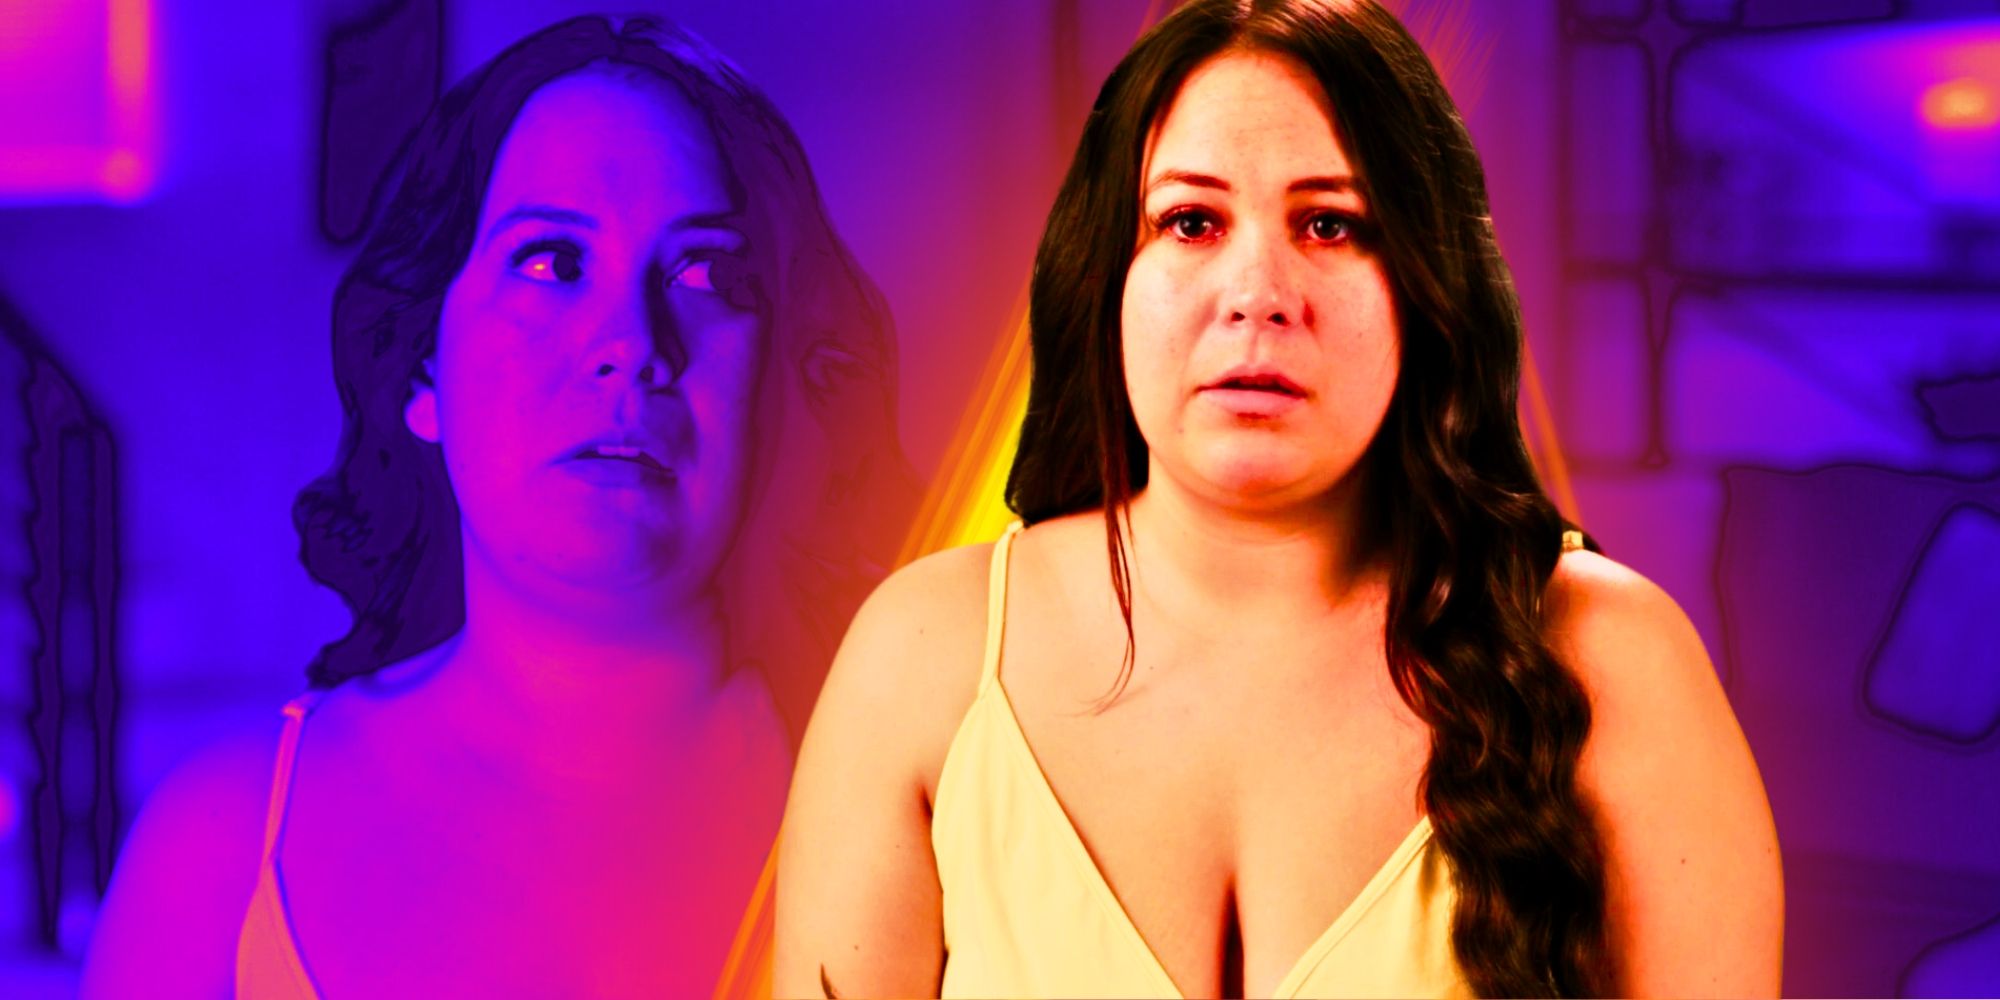 Montage of 90 Day Fiancé's Liz Woods looking unsure and unhappy